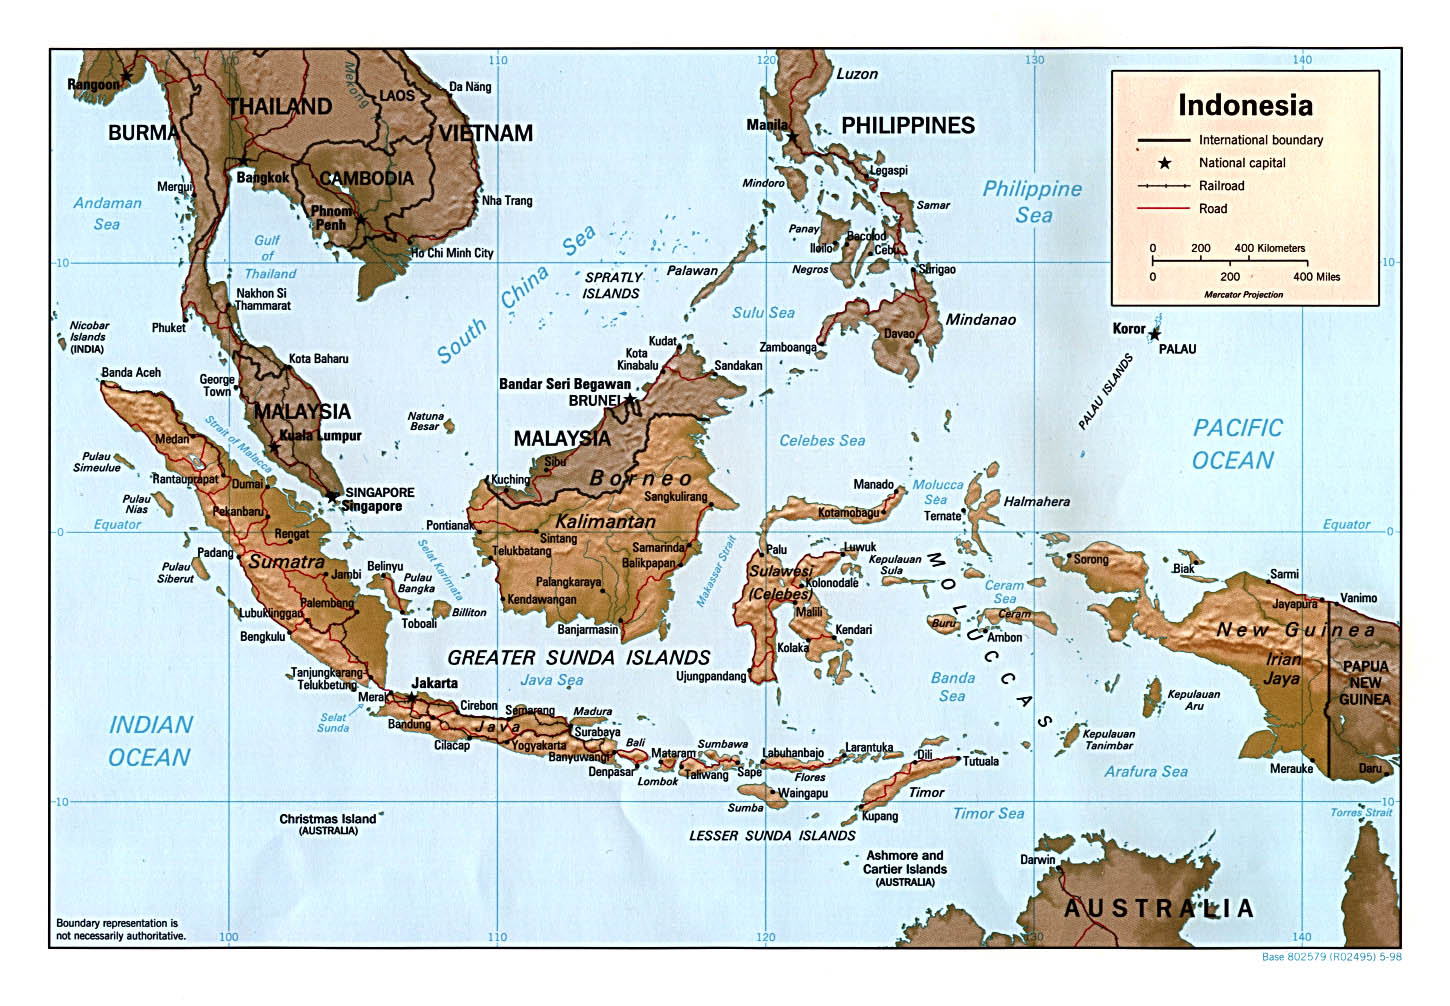 Map Of Indonesia , Indonesia [Shaded Relief Map] U.S. Central Intelligence Agency 1998 (274K) 